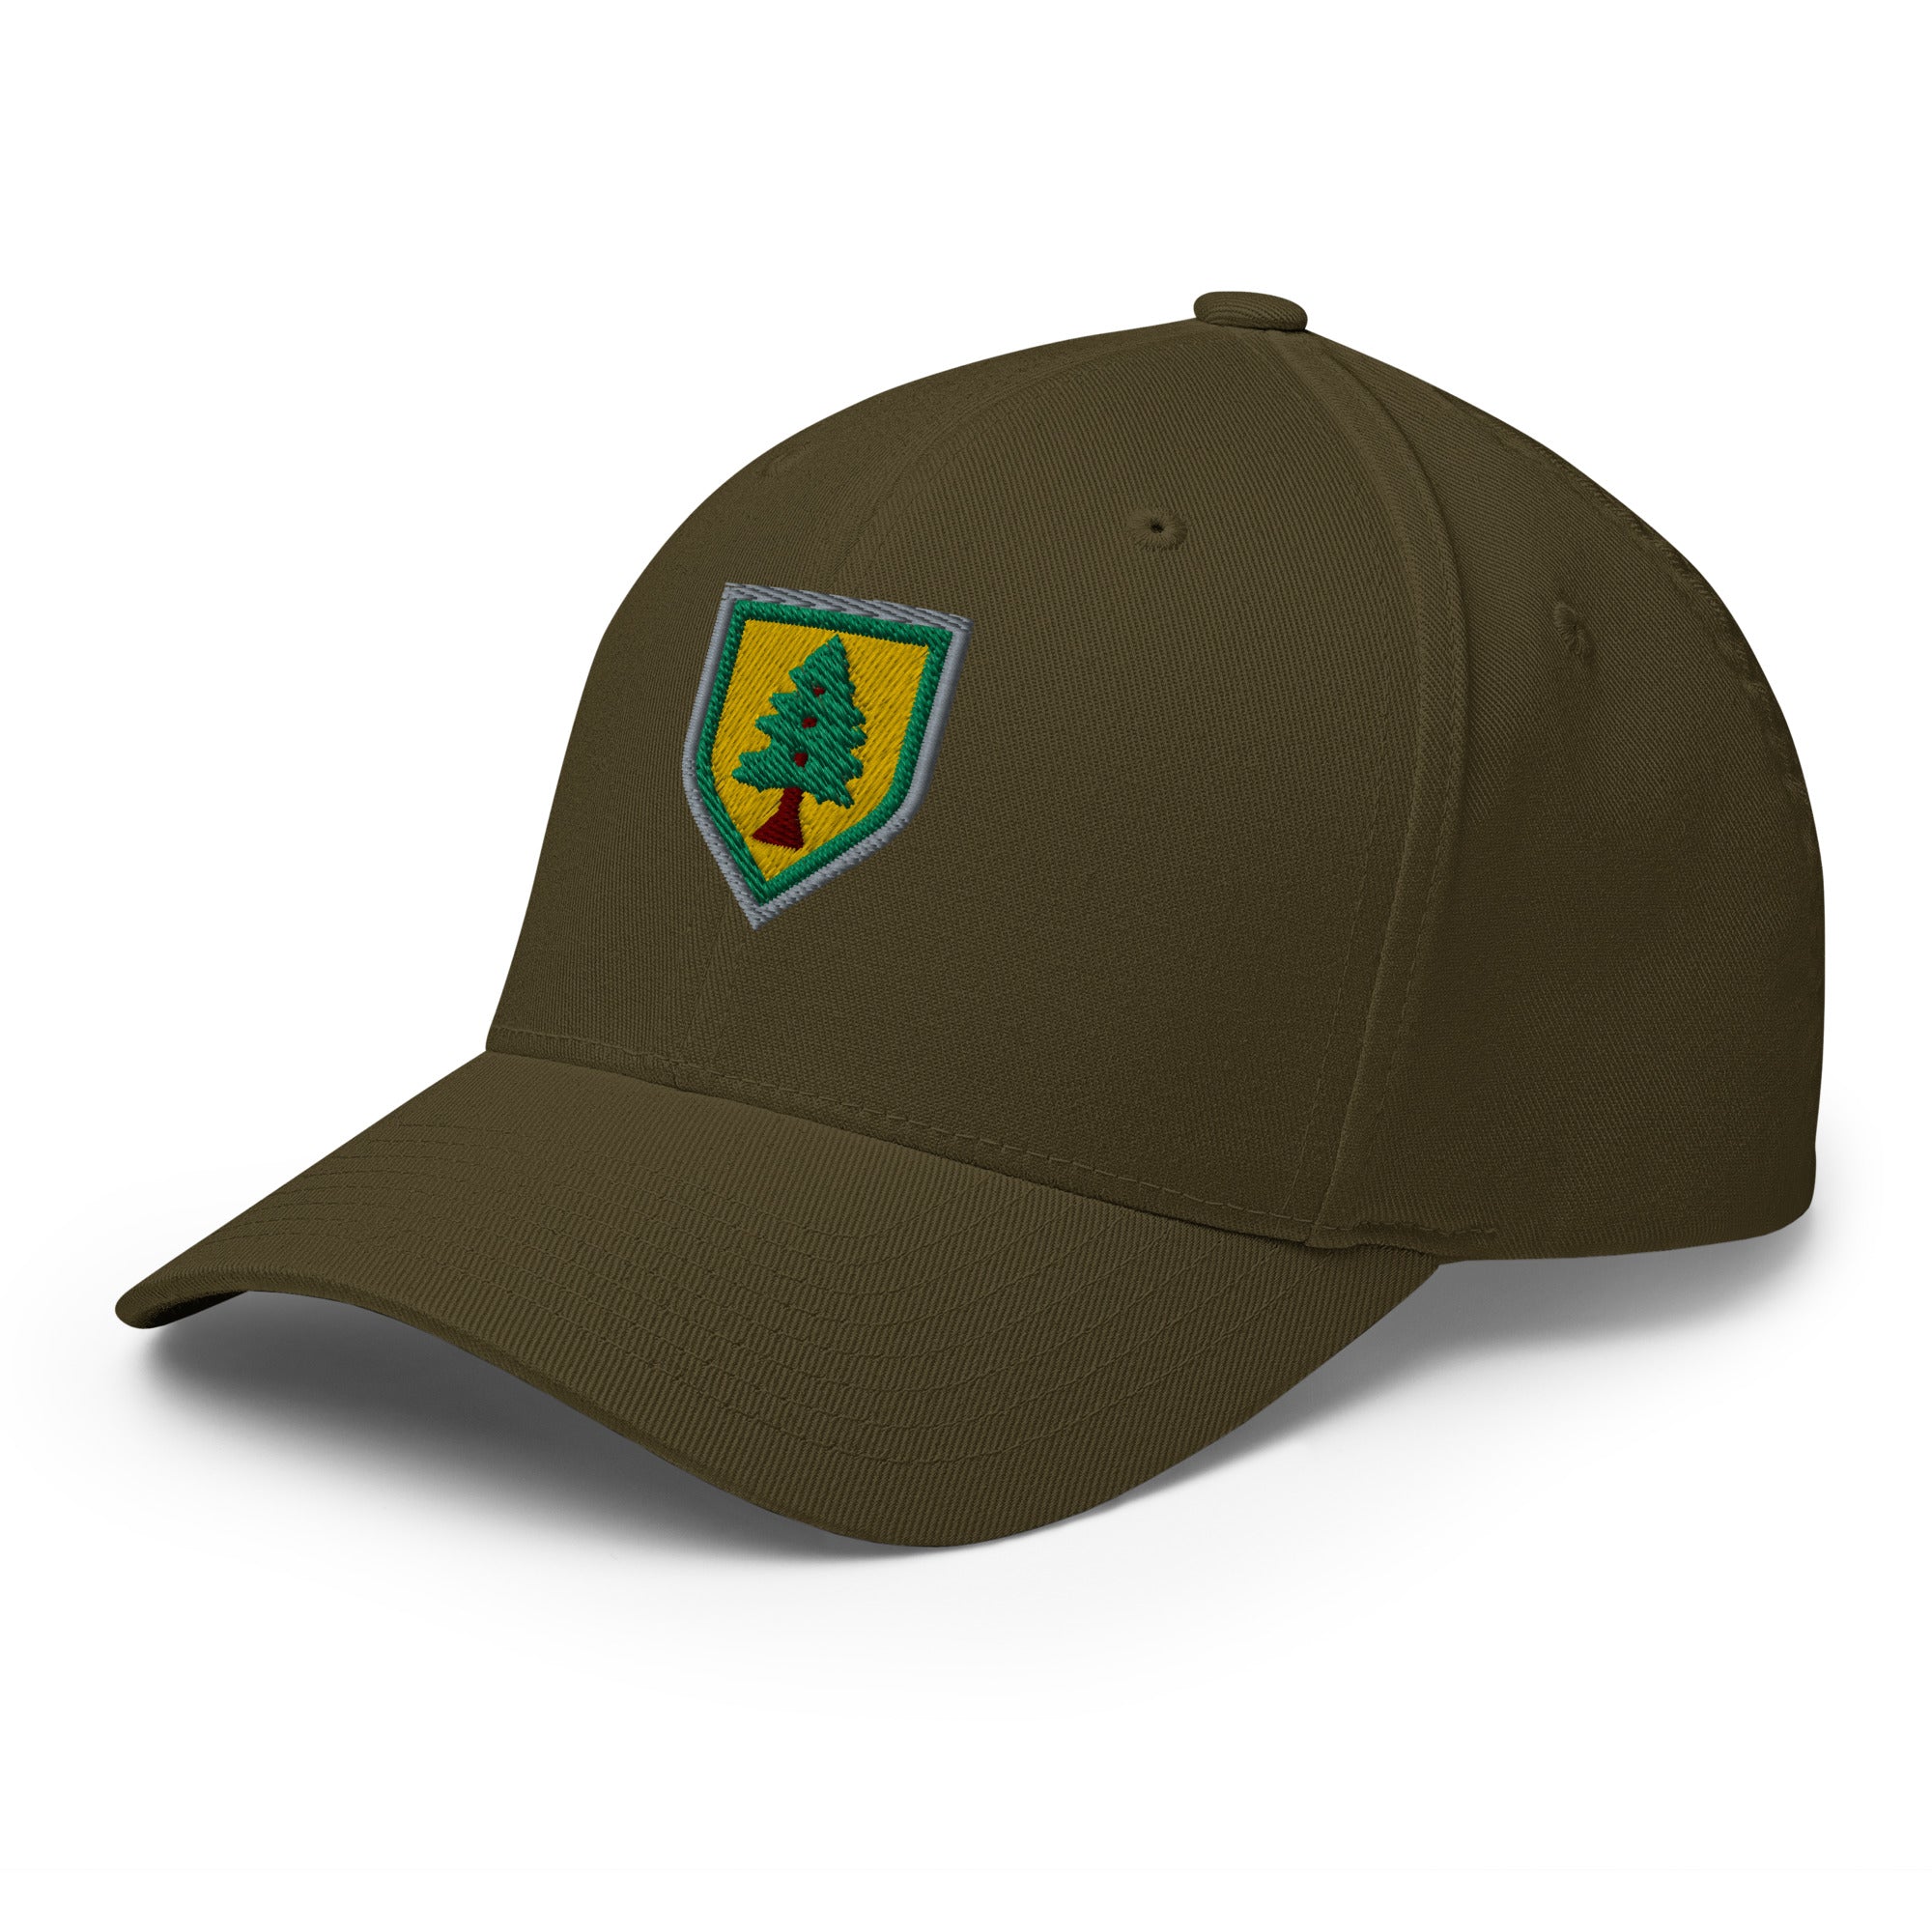 Rugby Imports Humboldt Rugby Structured Flexfit Hat